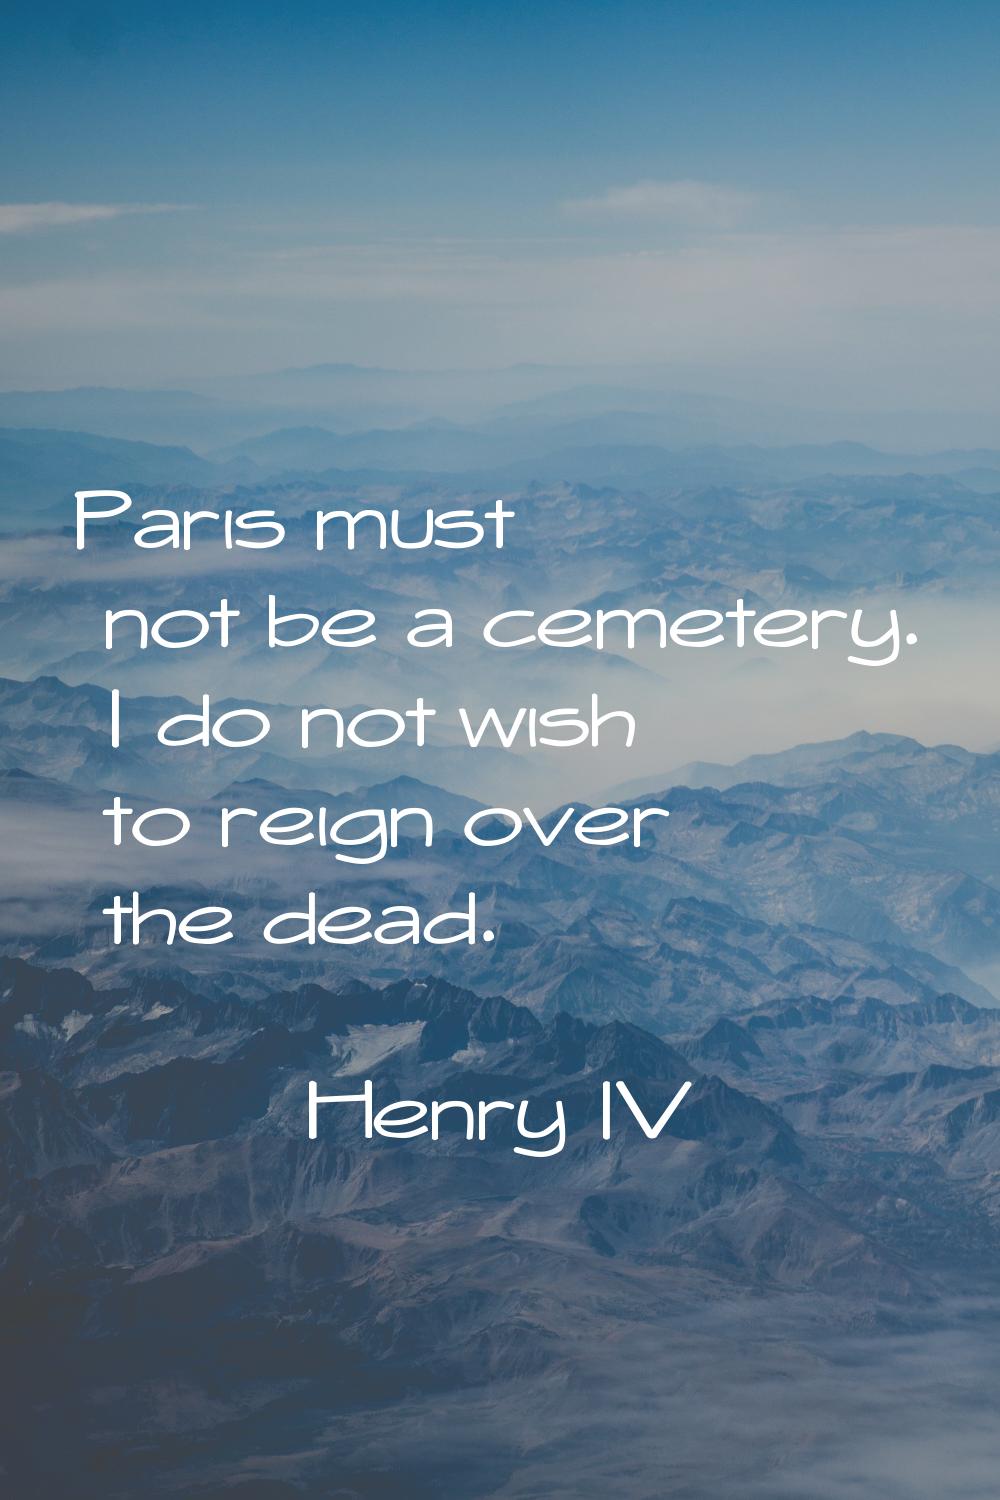 Paris must not be a cemetery. I do not wish to reign over the dead.